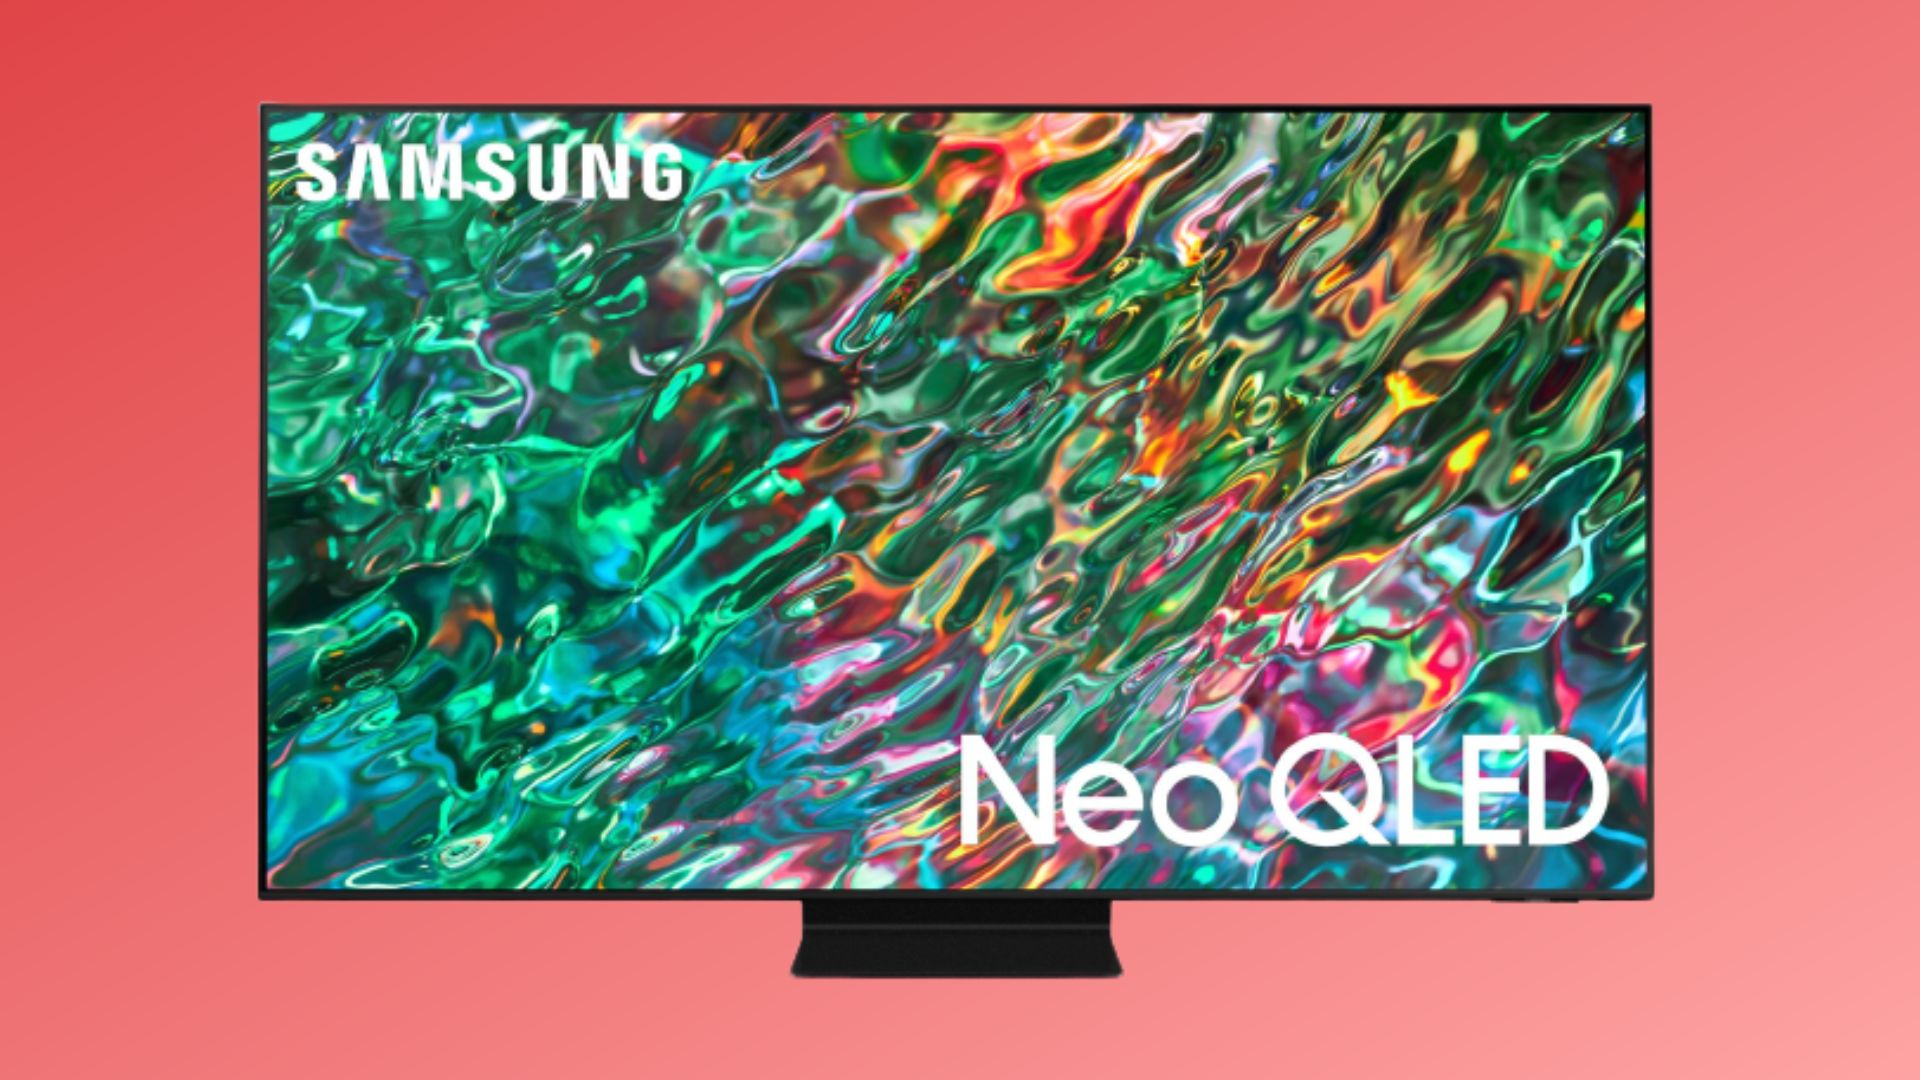 Early Labor Day sales are here with $800 off this Samsung QLED 4K TV